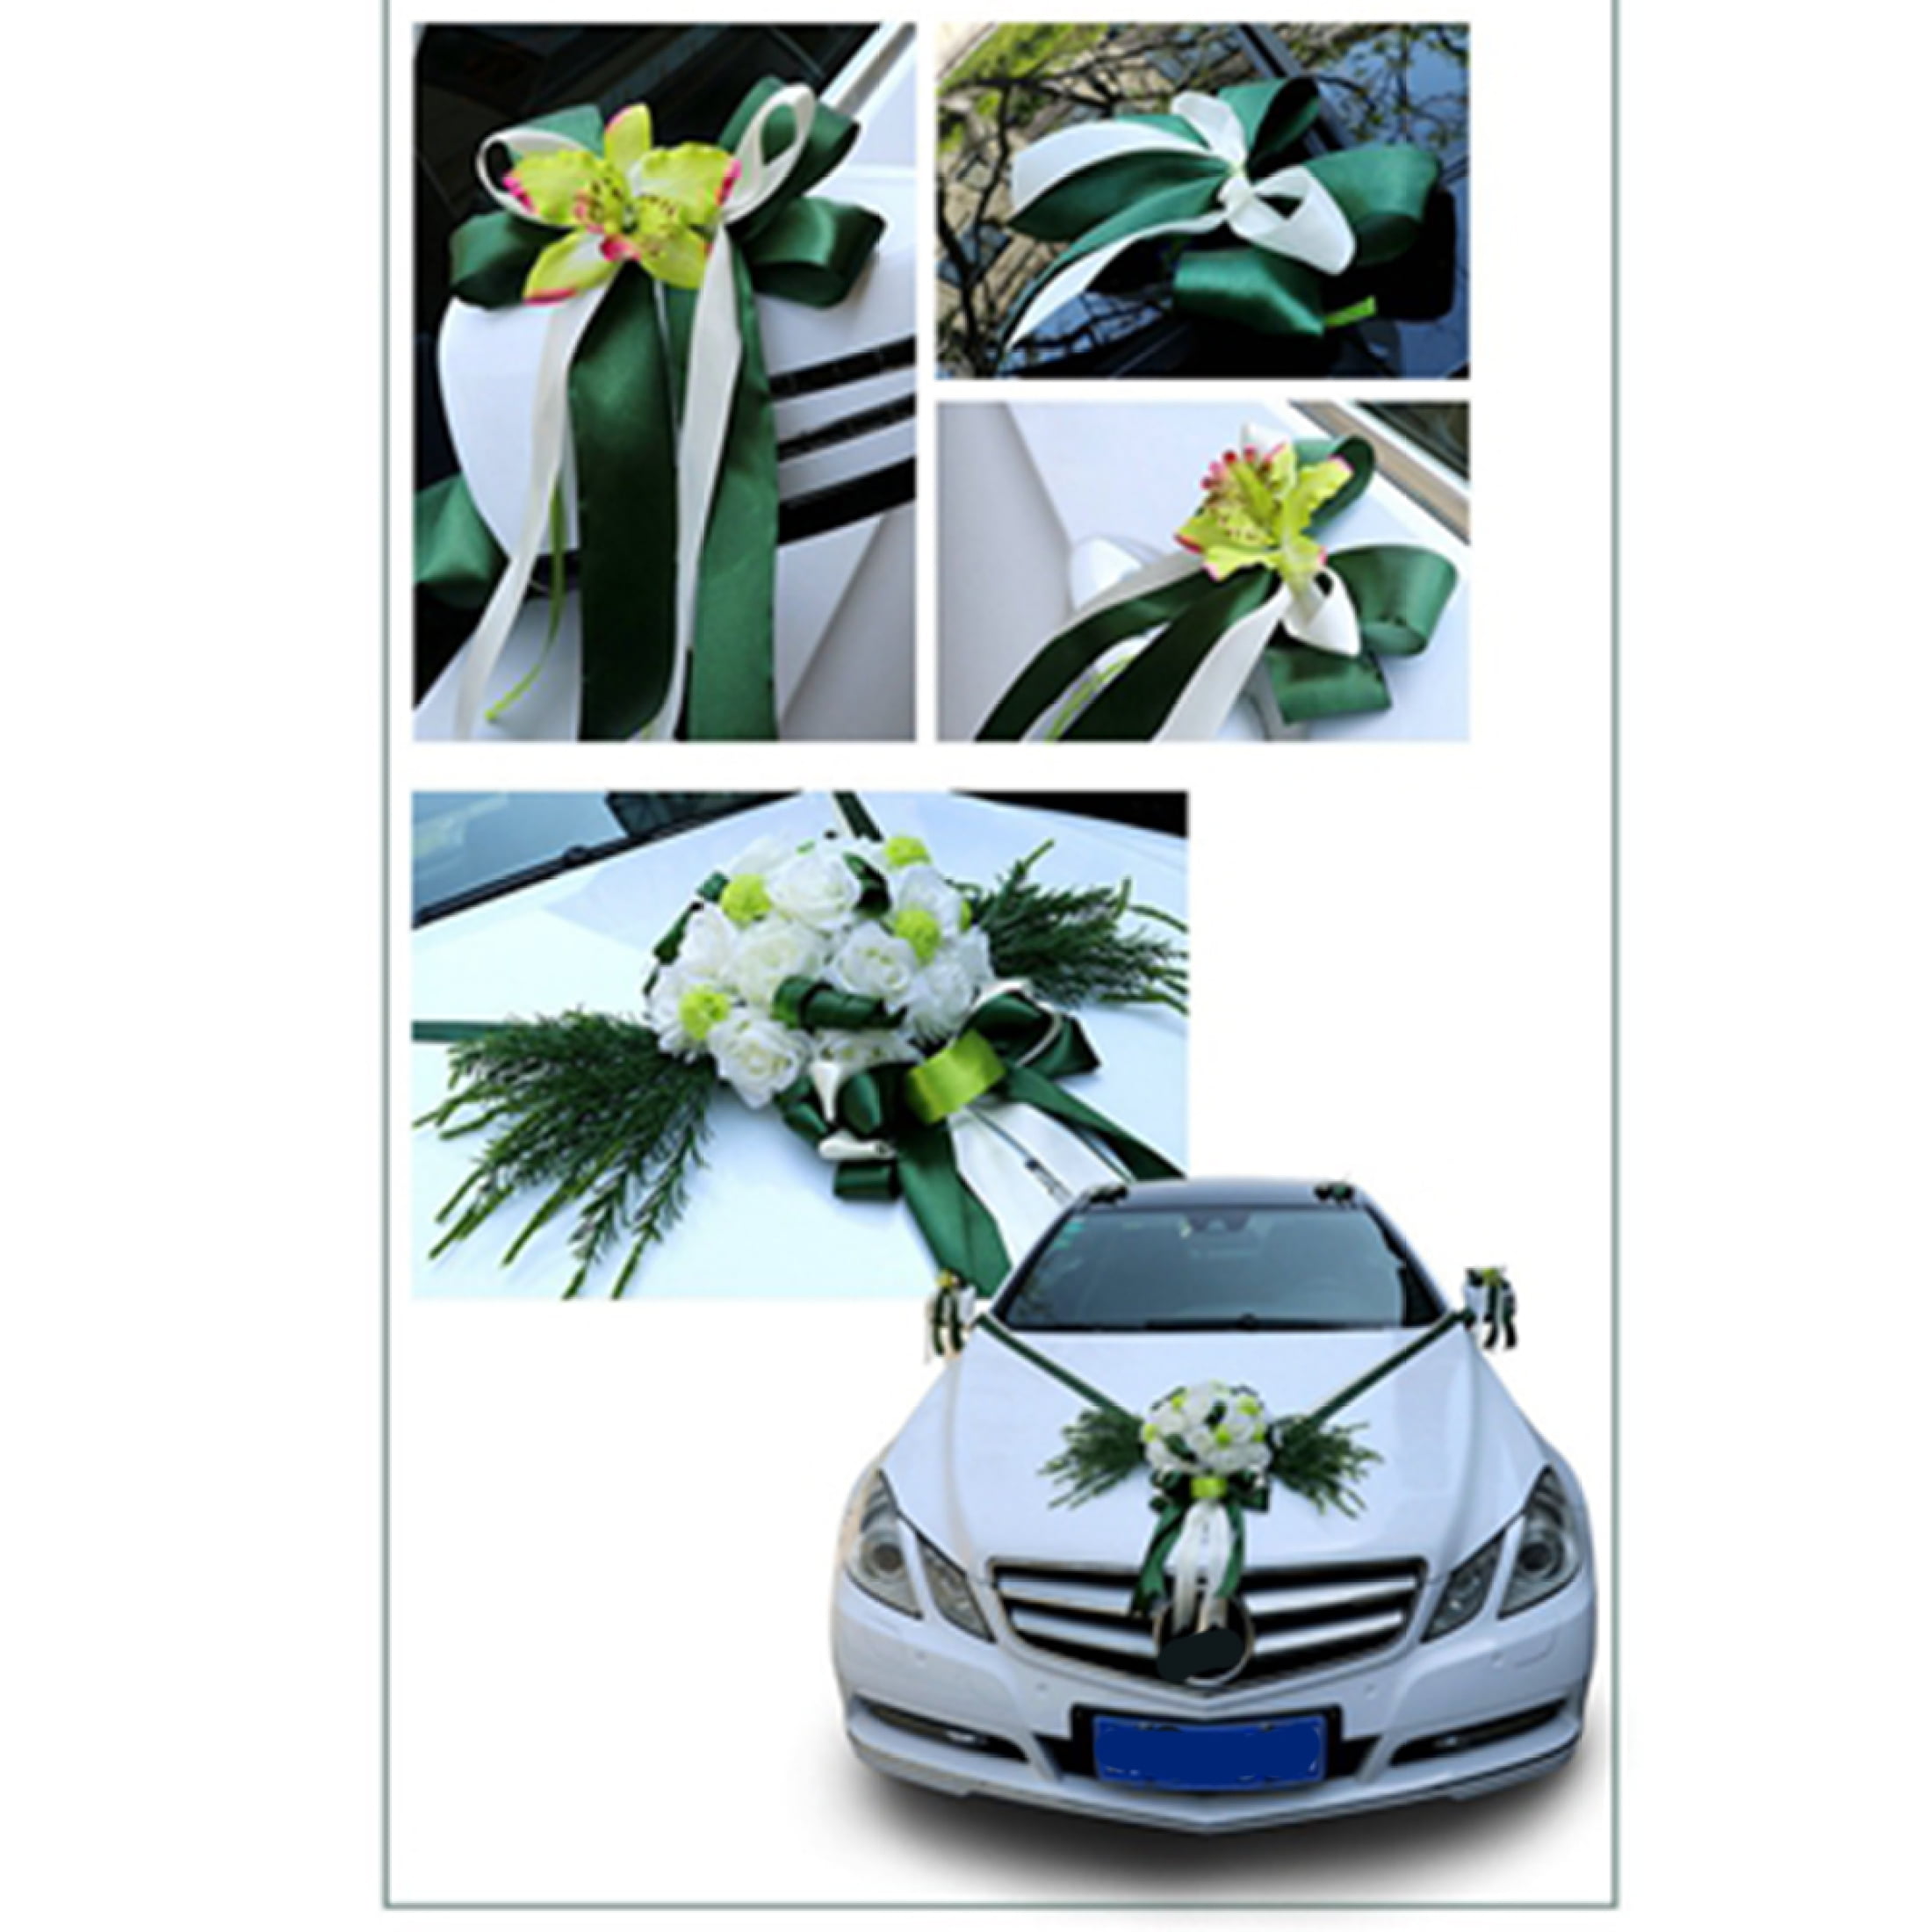  oAutoSjy Wedding Car Flower Decoration Artificial Flower Plate  Ribbon Bows Set Wedding Decorations for Car Door Handle Ornament Supplies  Artificial Rose Flowers Garland for Party Events Accessories : Home &  Kitchen